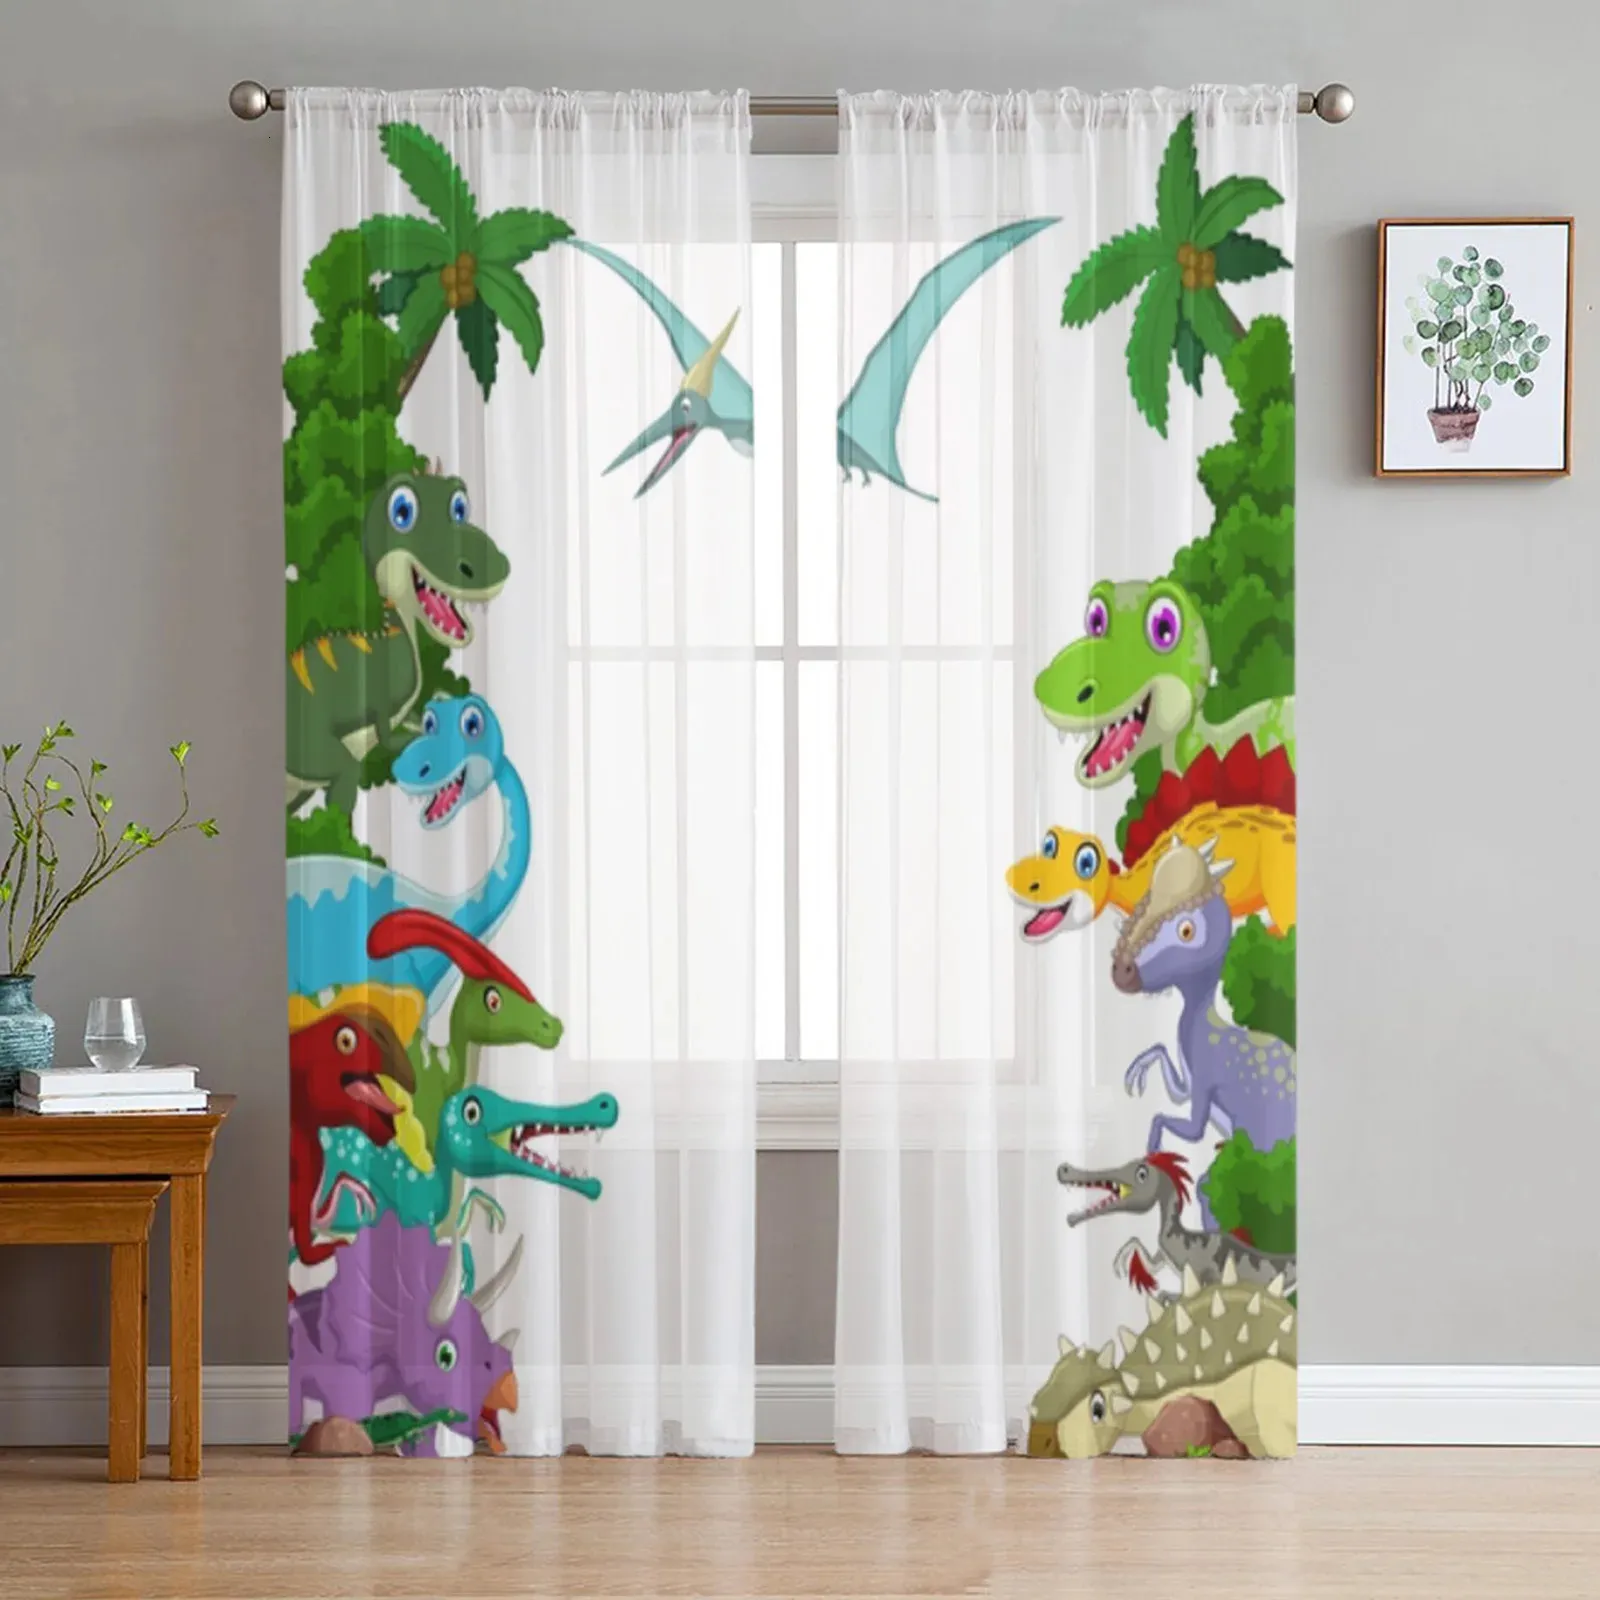 Curtain Jungle Cartoon Dinosaur Tulle Curtains for Bedroom Home Decor Living Room Kitchen Voile Blind Drapes 231010